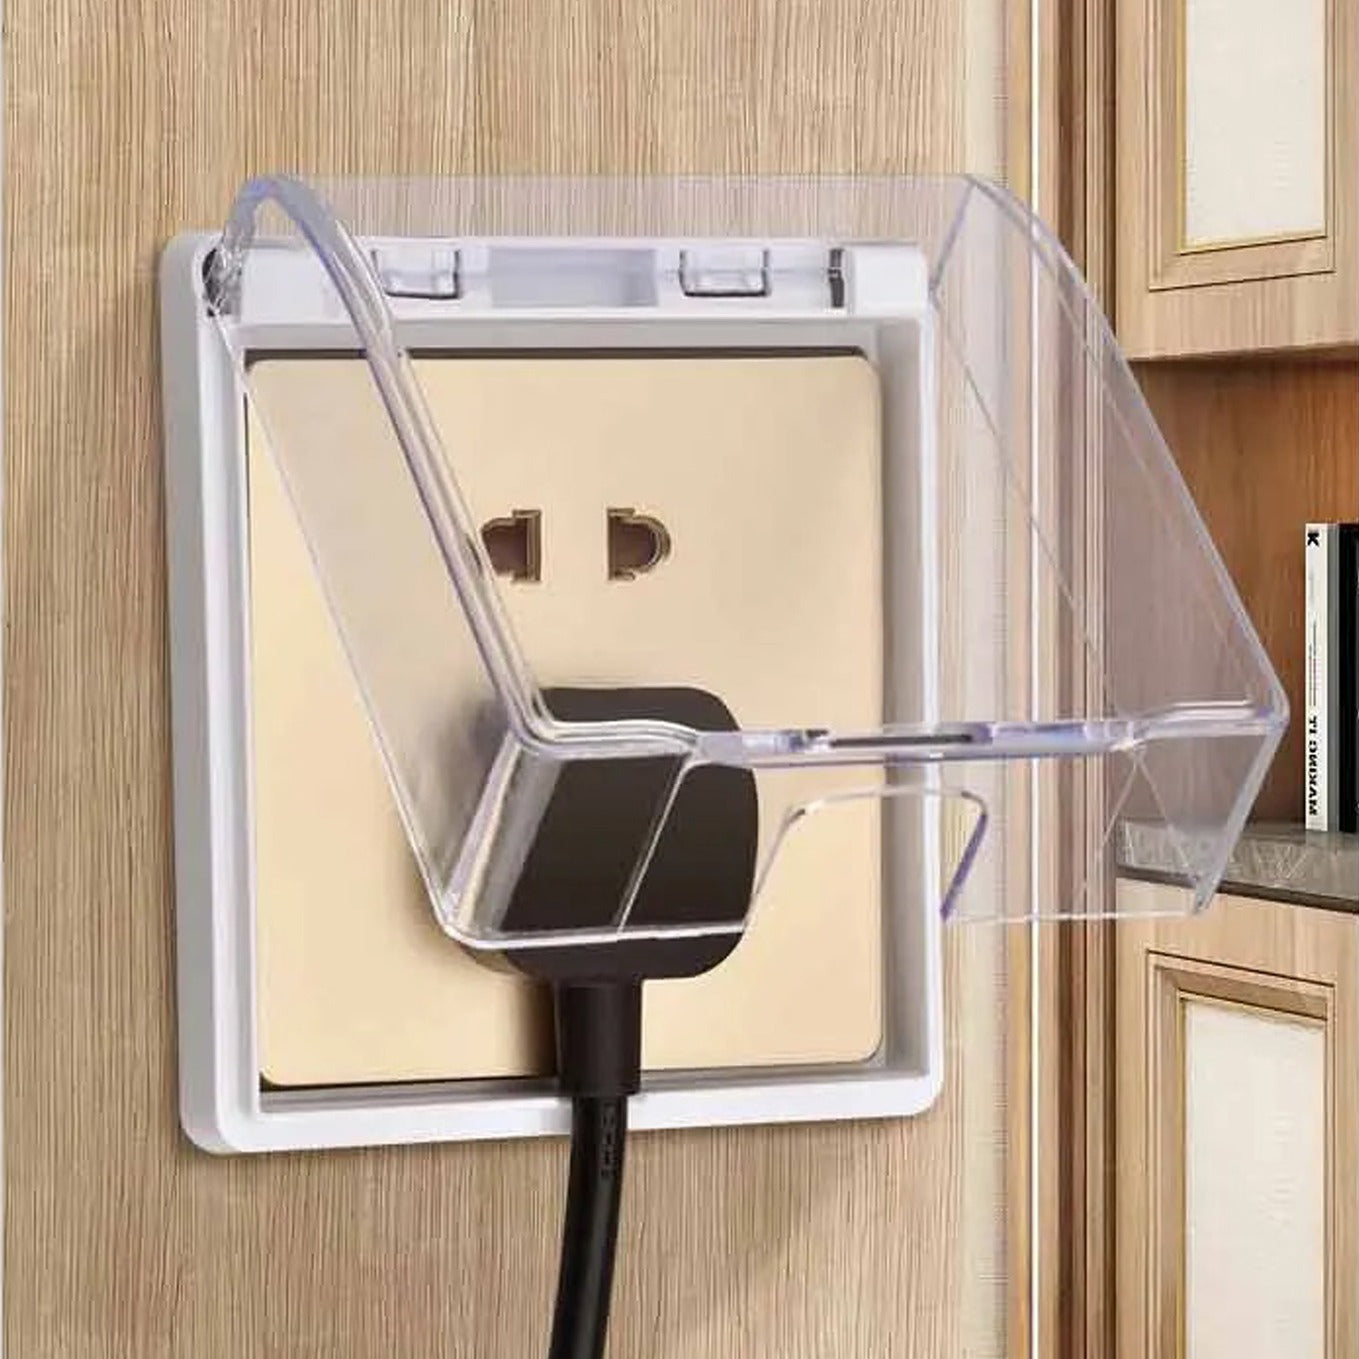 Switch Socket Waterproof Cover - Bathroom Splash-Proof Protector, Transparent Adhesive Box for Outlet Safety